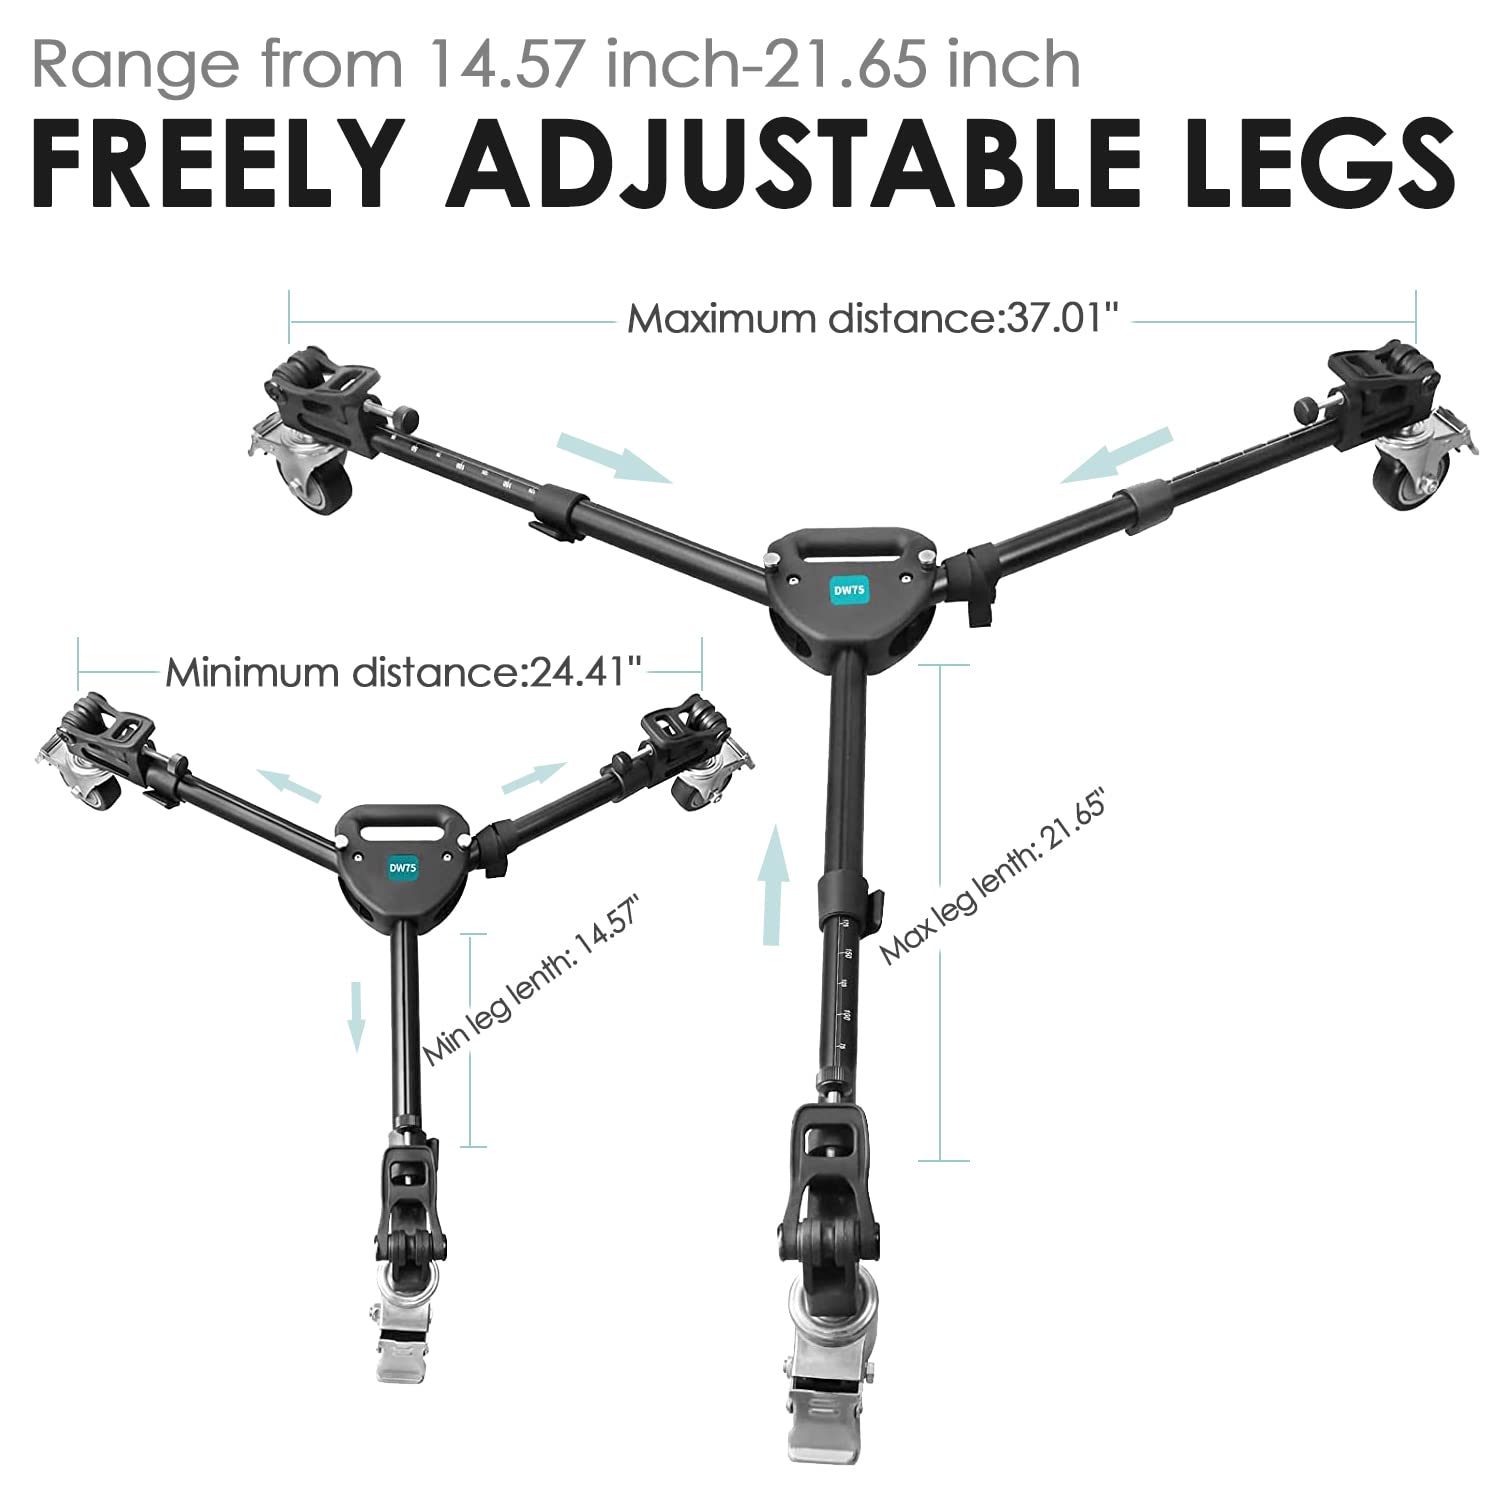 Heavy Duty Tripod Dolly, HTURS Professional Video Camera Dolly with Larger 3-inch Rubber Tripod Wheels, Adjustable Leg, Bag Compatible with Most DSLR Camera Tripods/Light Stand, Load Up to 66.14 LBS